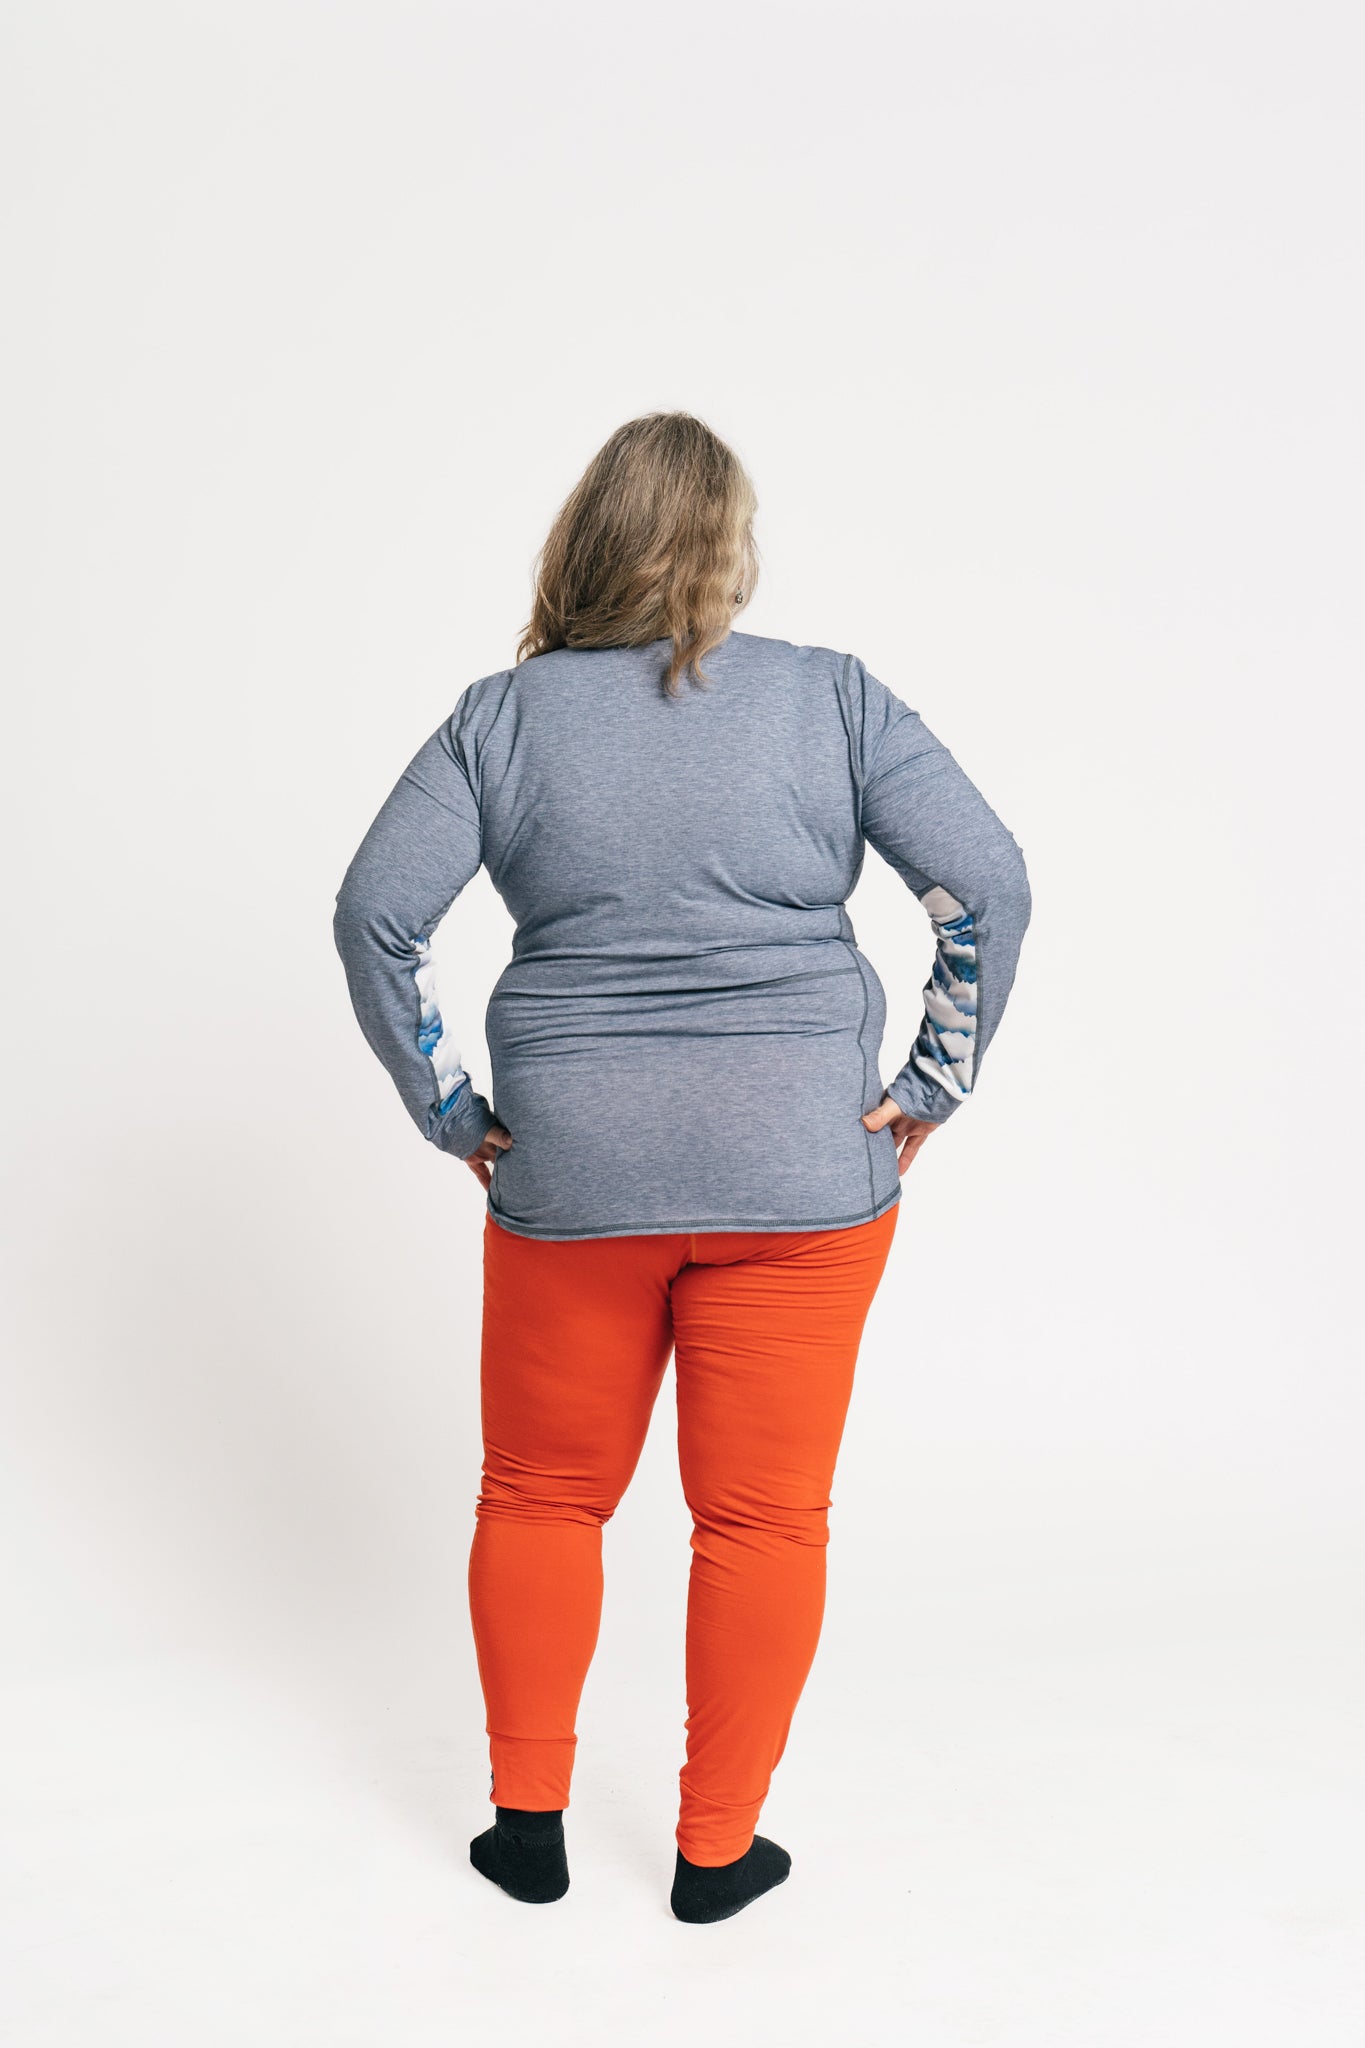 alpine fit base layer top and bottom plus size model viewed from the back